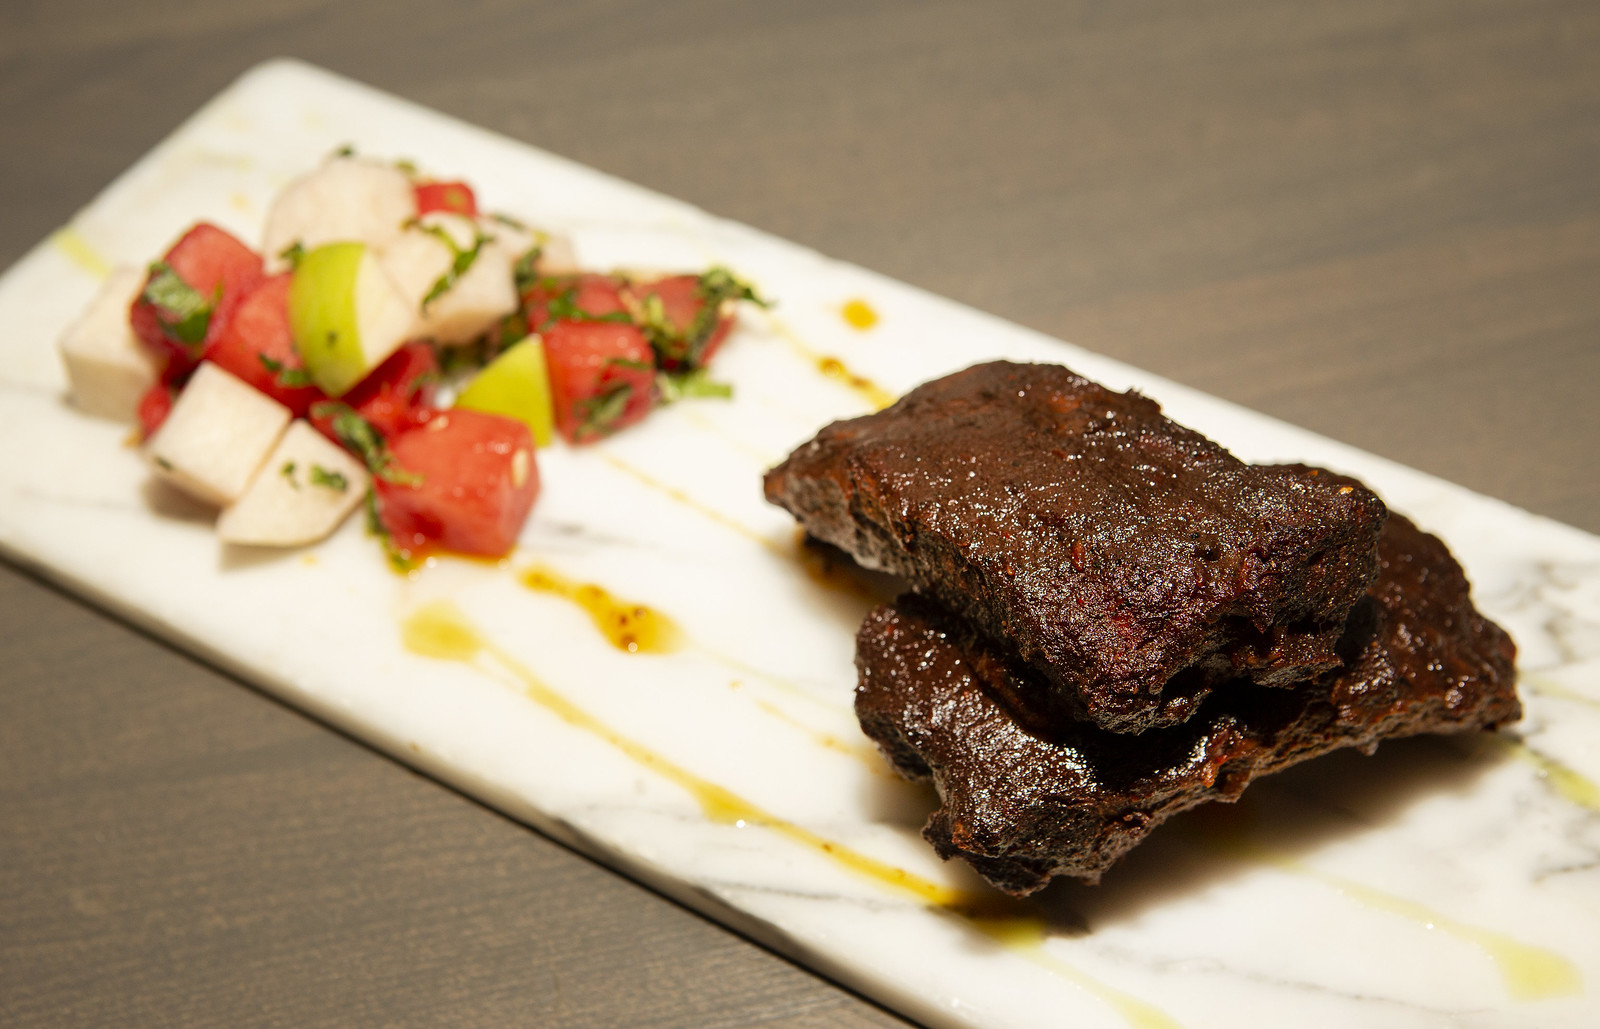 A skirt steak marinated in mole and spices on a rectangle plate with a small onion/tomato salad.